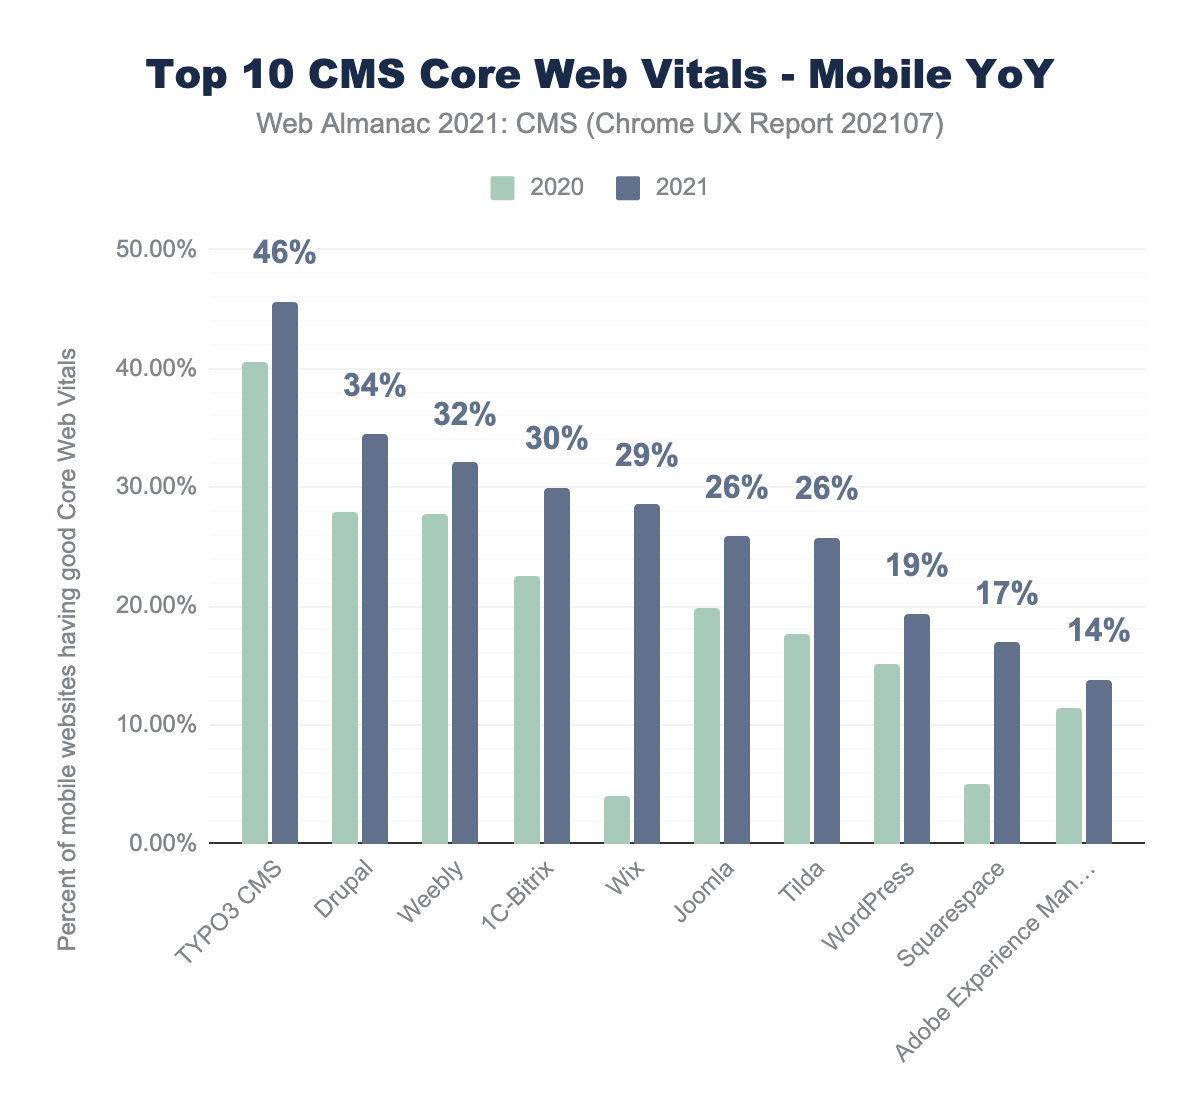 Top 10 CMSs core web vitals performance for mobile views year-over-year.